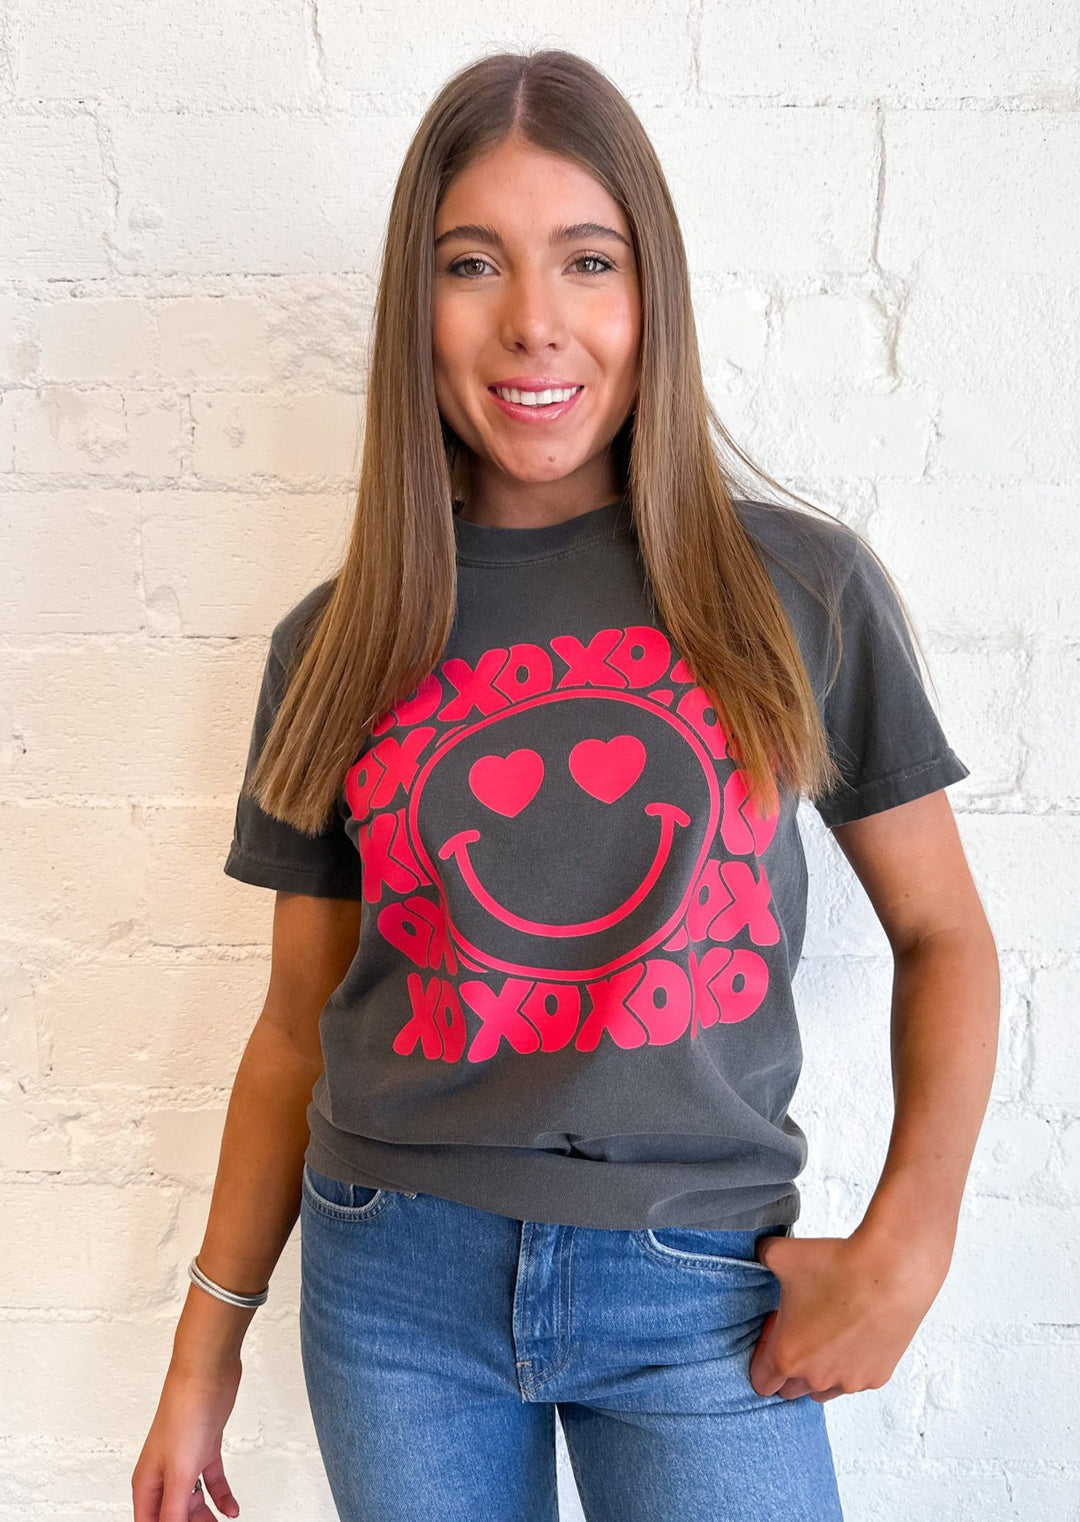 XOXO Heart Eyes Tee, Tops, Adeline, Adeline, dallas boutique, dallas texas, texas boutique, women's boutique dallas, adeline boutique, dallas boutique, trendy boutique, affordable boutique